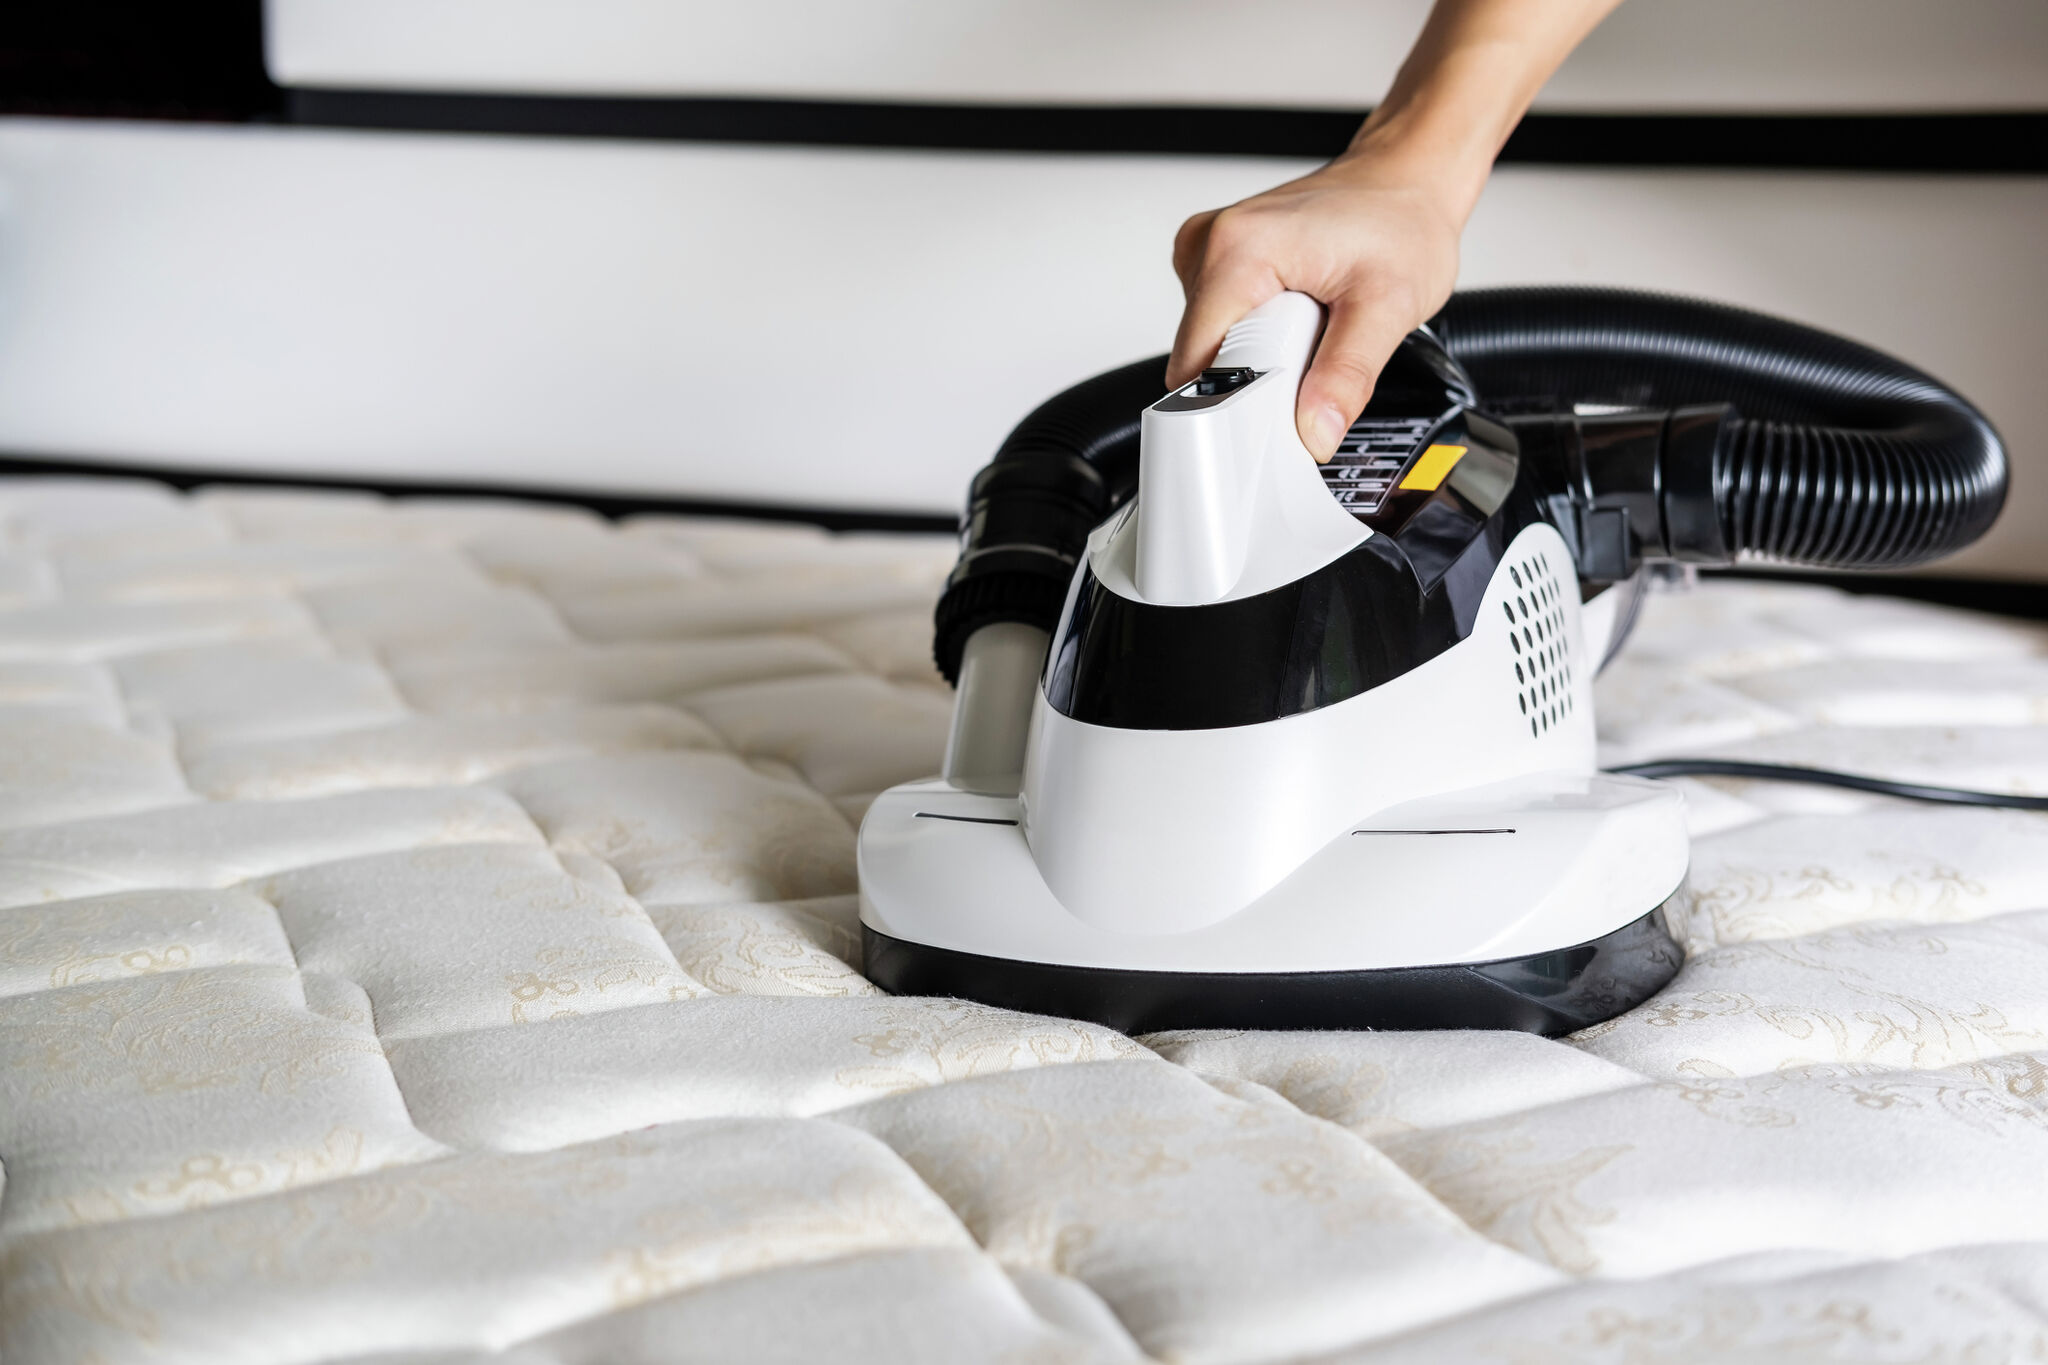 How to Clean Pee on a Mattress - The Happier Homemaker